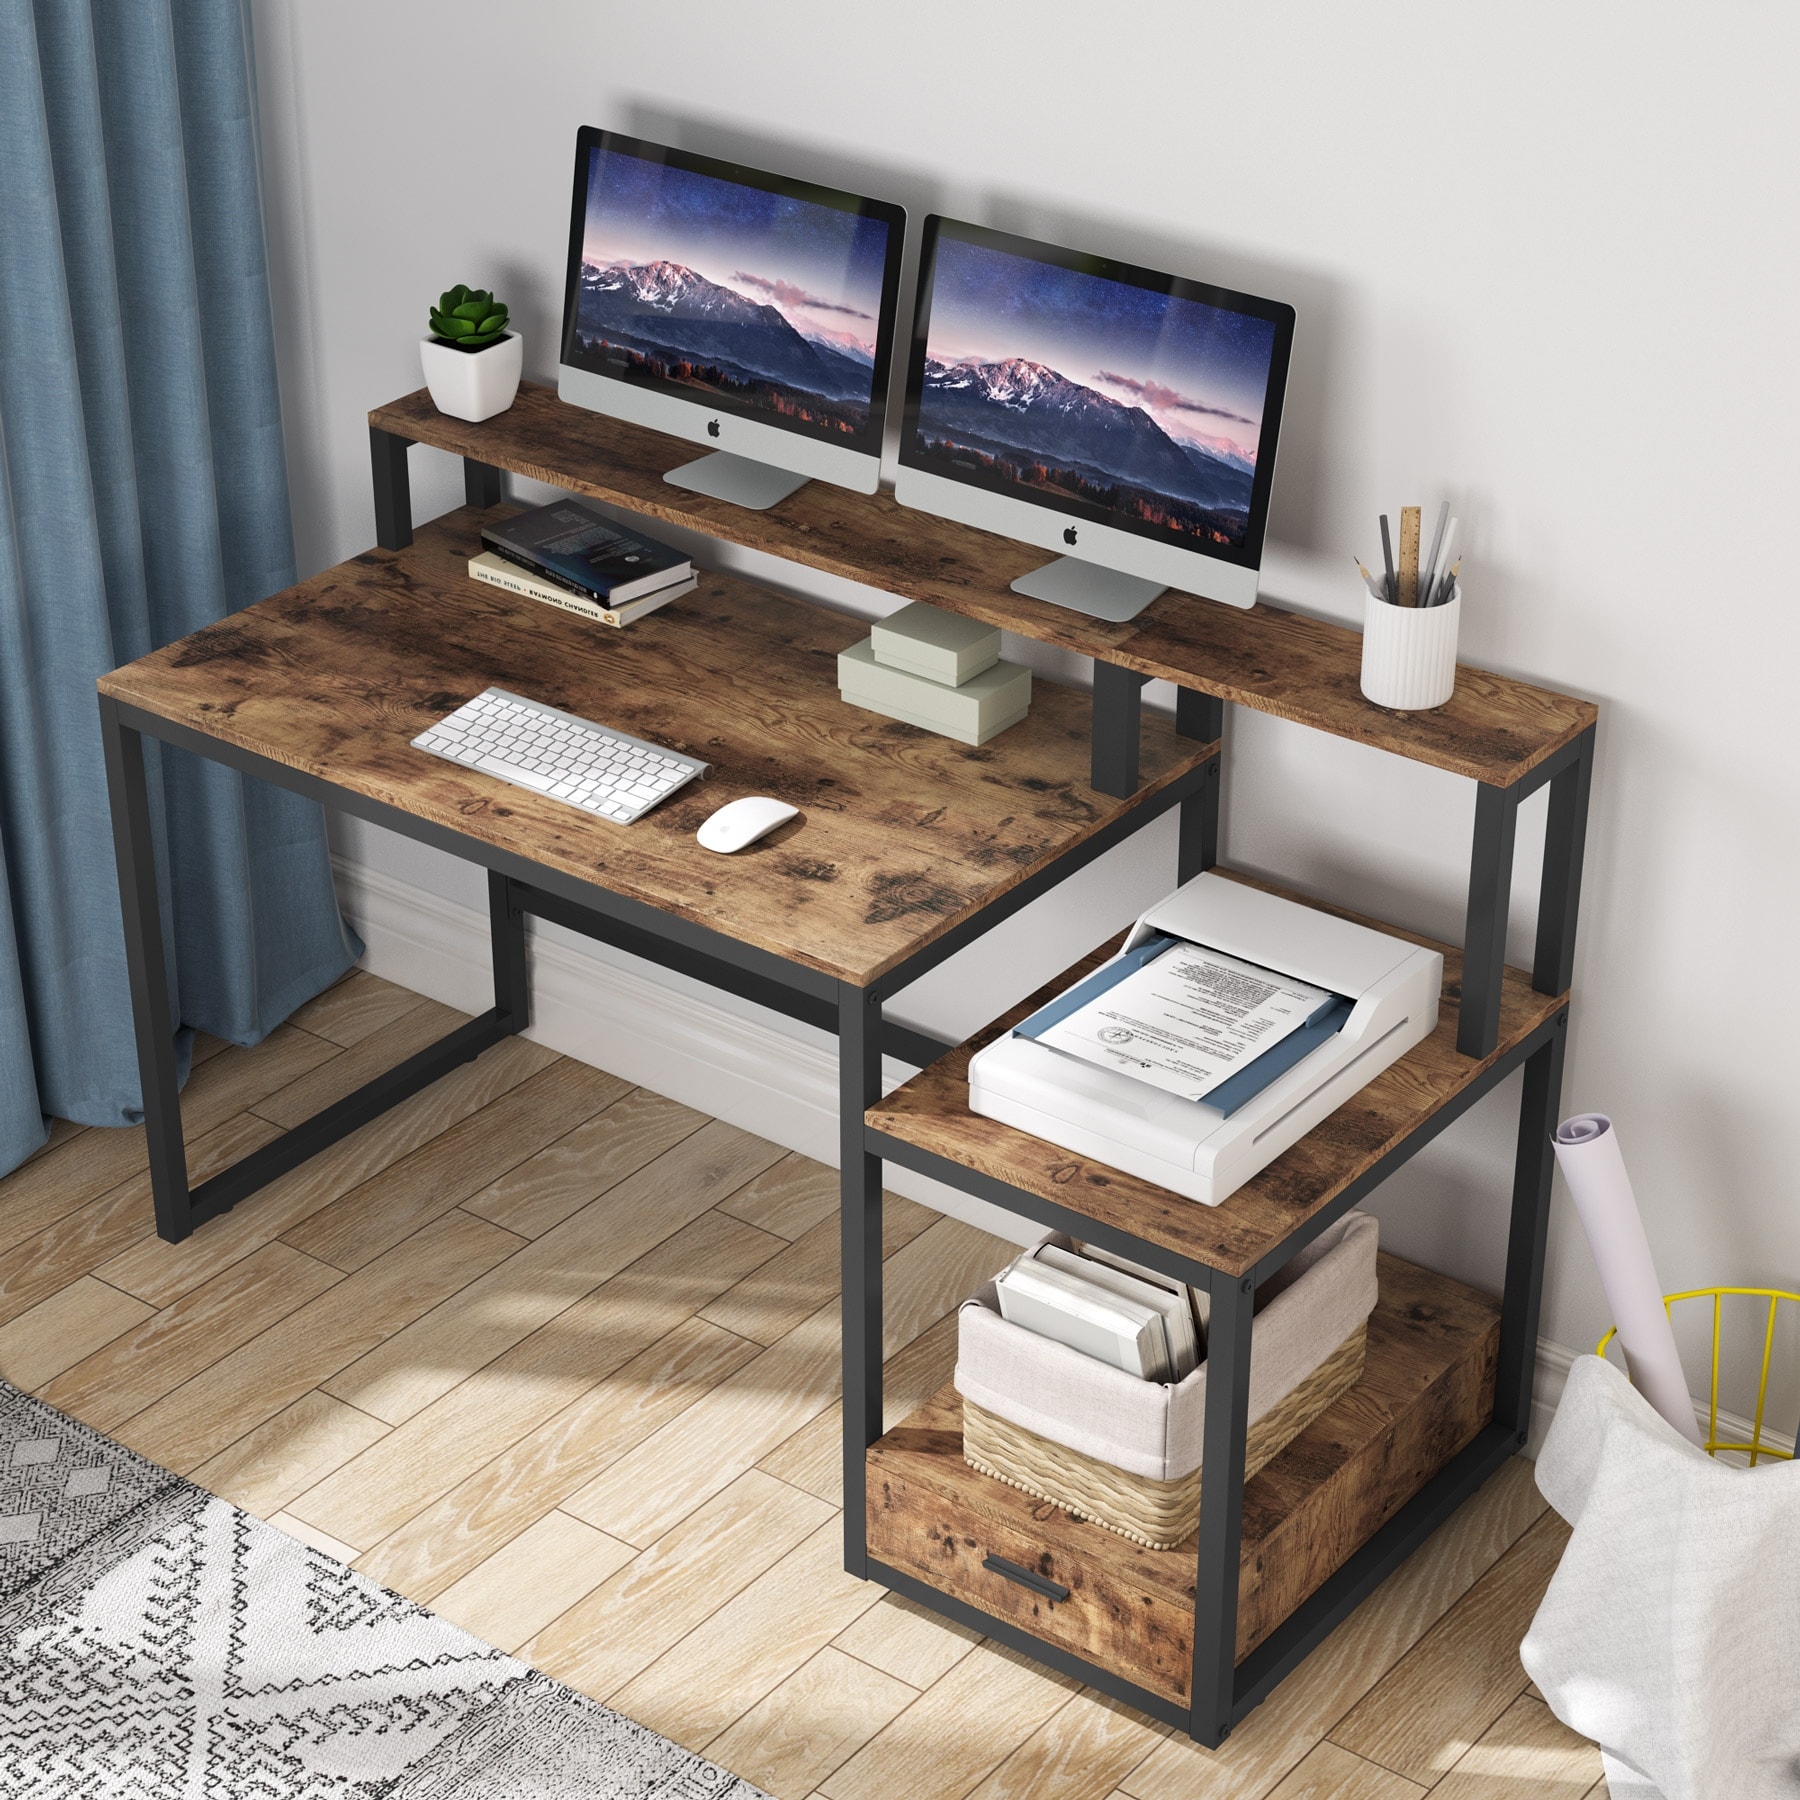 https://ak1.ostkcdn.com/images/products/is/images/direct/f04c6d78b711477627487deab072ab71e66fa934/59%27%27-Computer-Desk-with-Drawer%2C-Storage-Shelves-and-Monitor-Stand.jpg